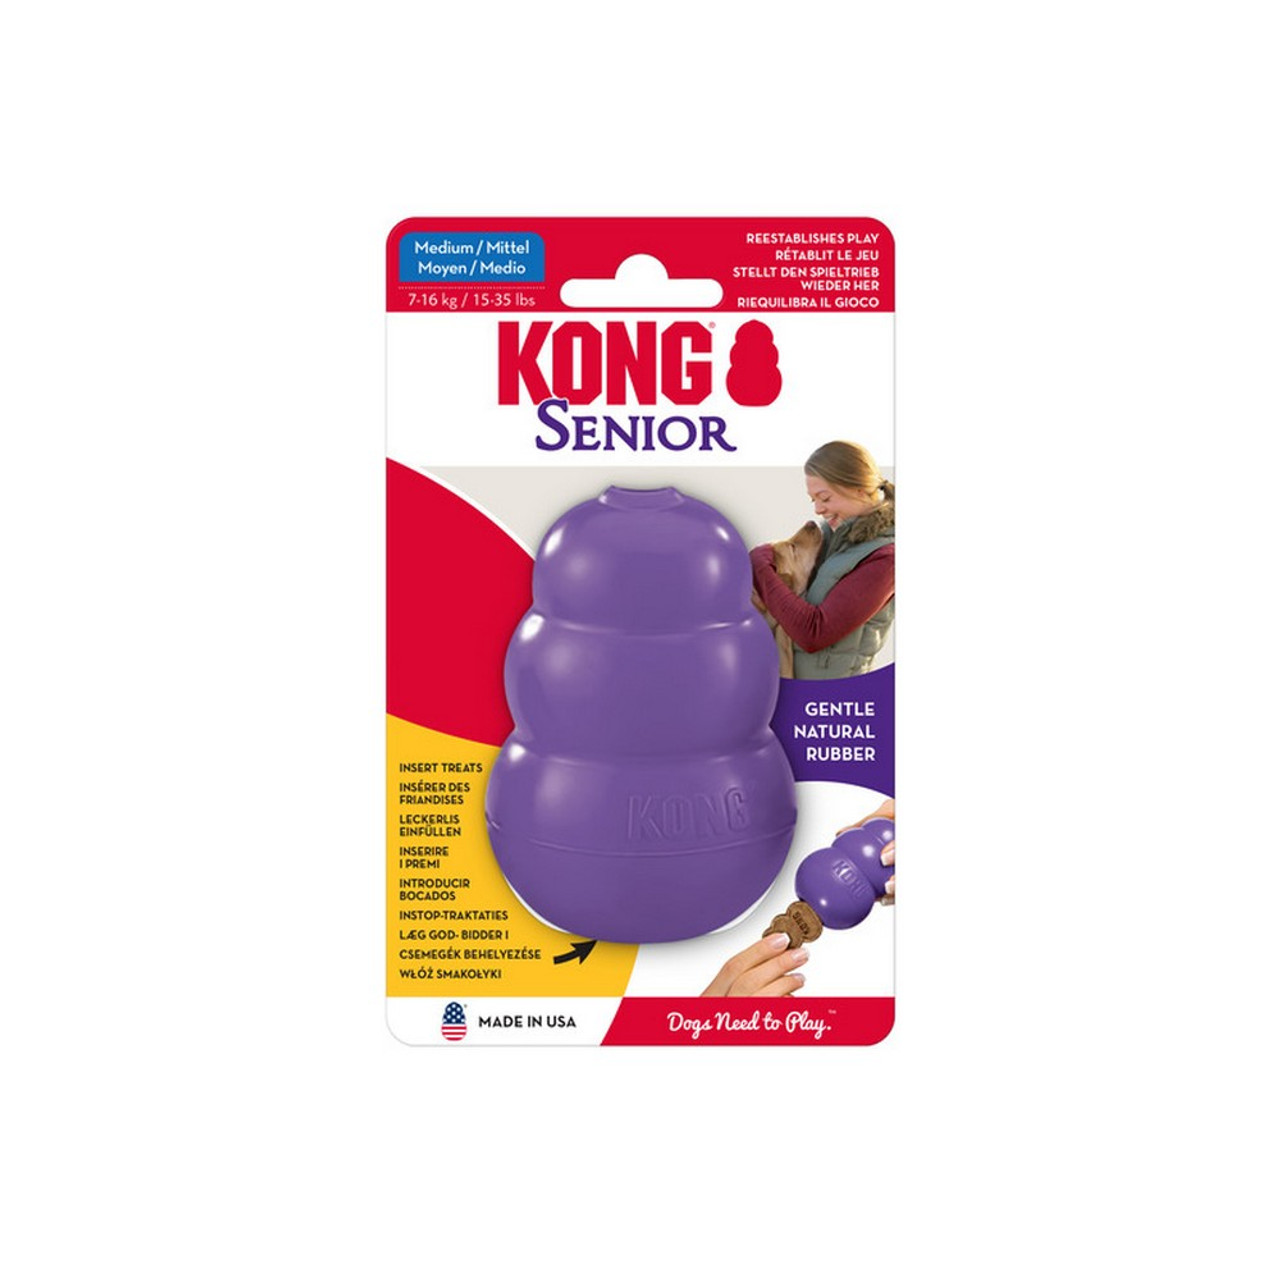 KONG Senior Gentle Natural Rubber Dog Toy, Small, Purple